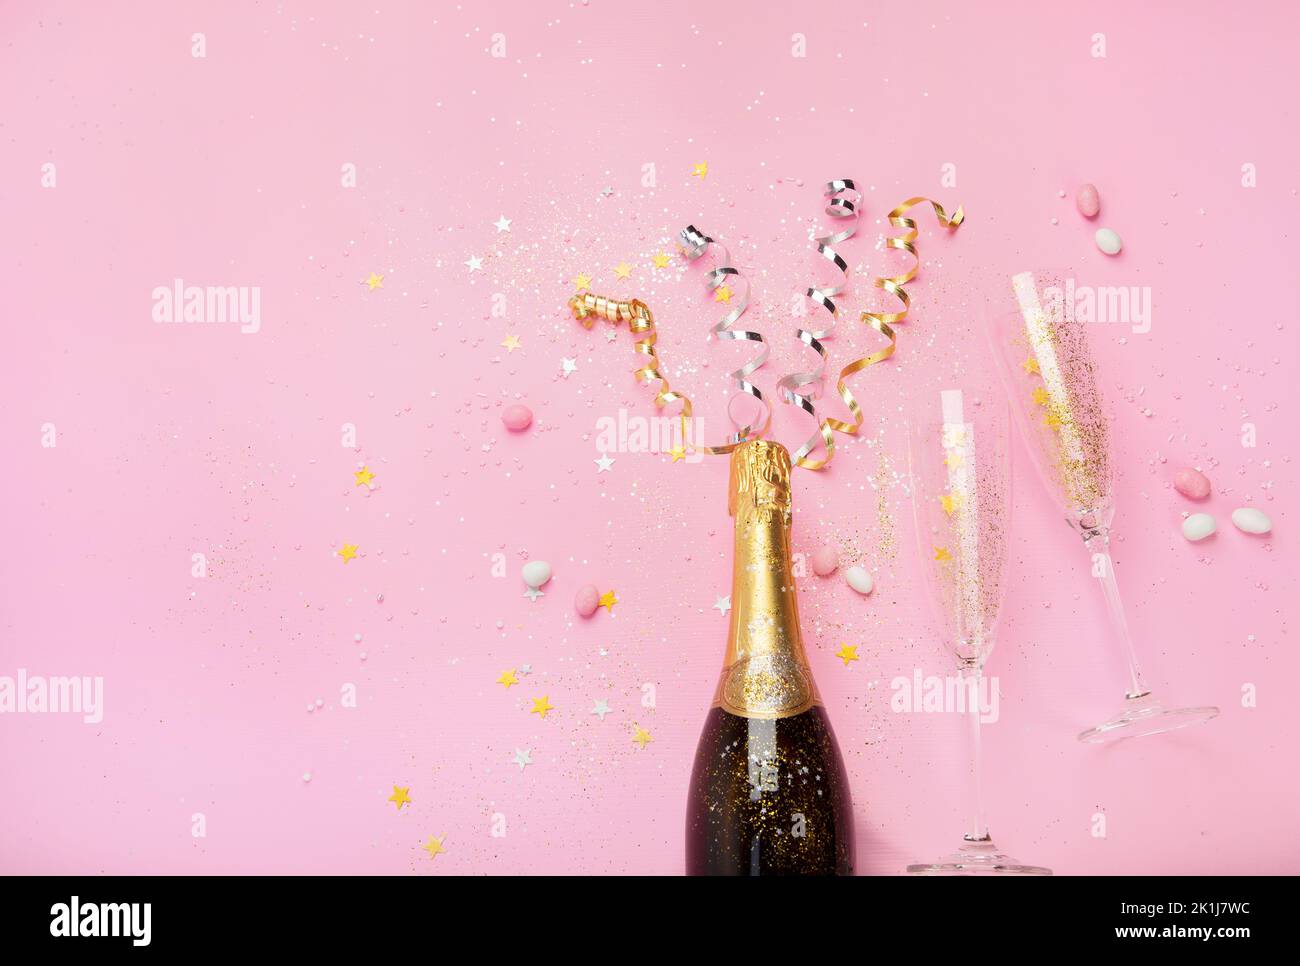 Champagne bottle with confetti on pink background. Holiday decoration and party streamers on gold festive. Creative concept. Top view, copy space Stock Photo